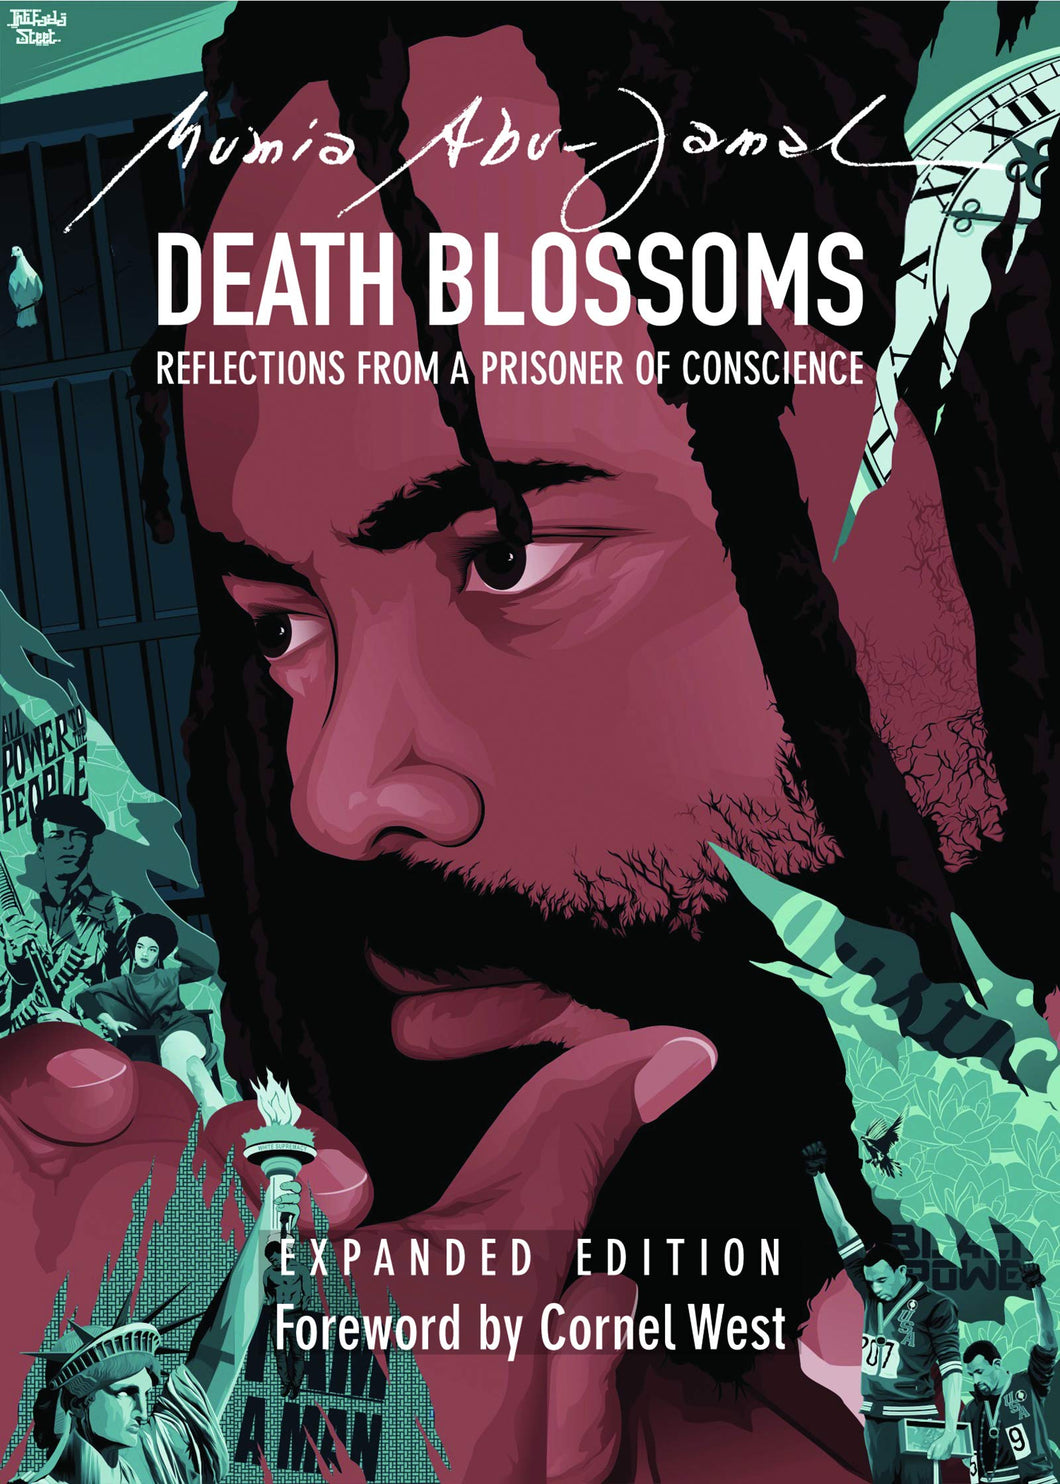 Death Blossoms: Reflections from a Prisoner of Conscience by Mumia Abu-Jamal